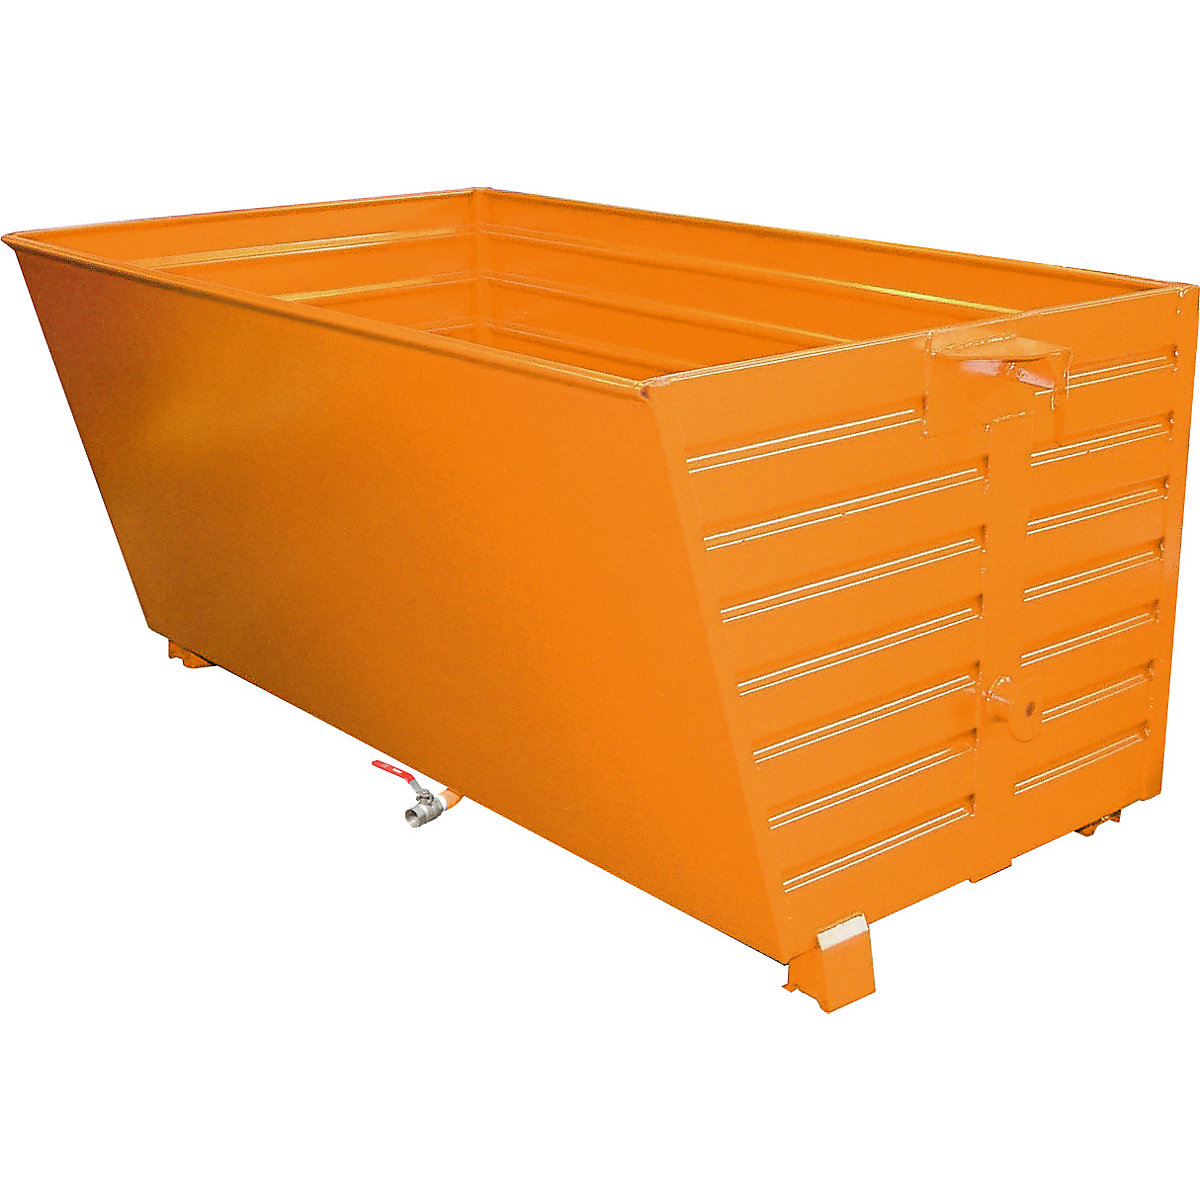 BSL stacking tilting skip for metal swarf with perforated base – eurokraft pro